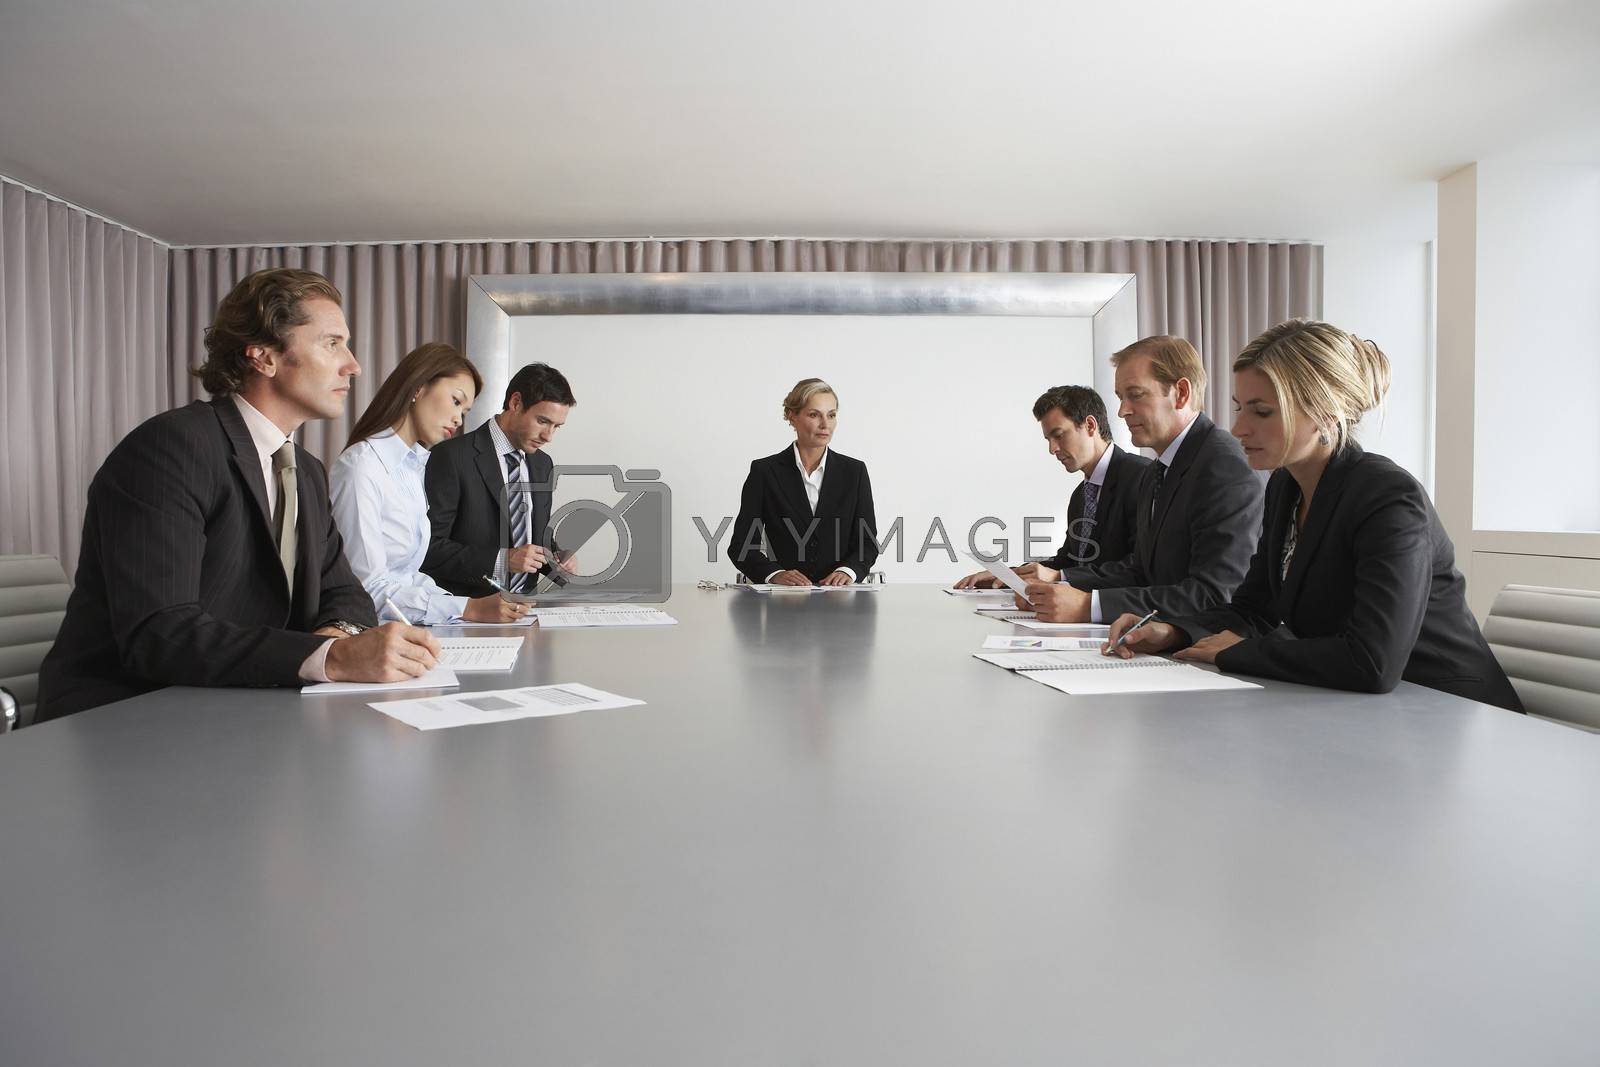 Royalty free image of Businesspeople Meeting in Conference Room by moodboard